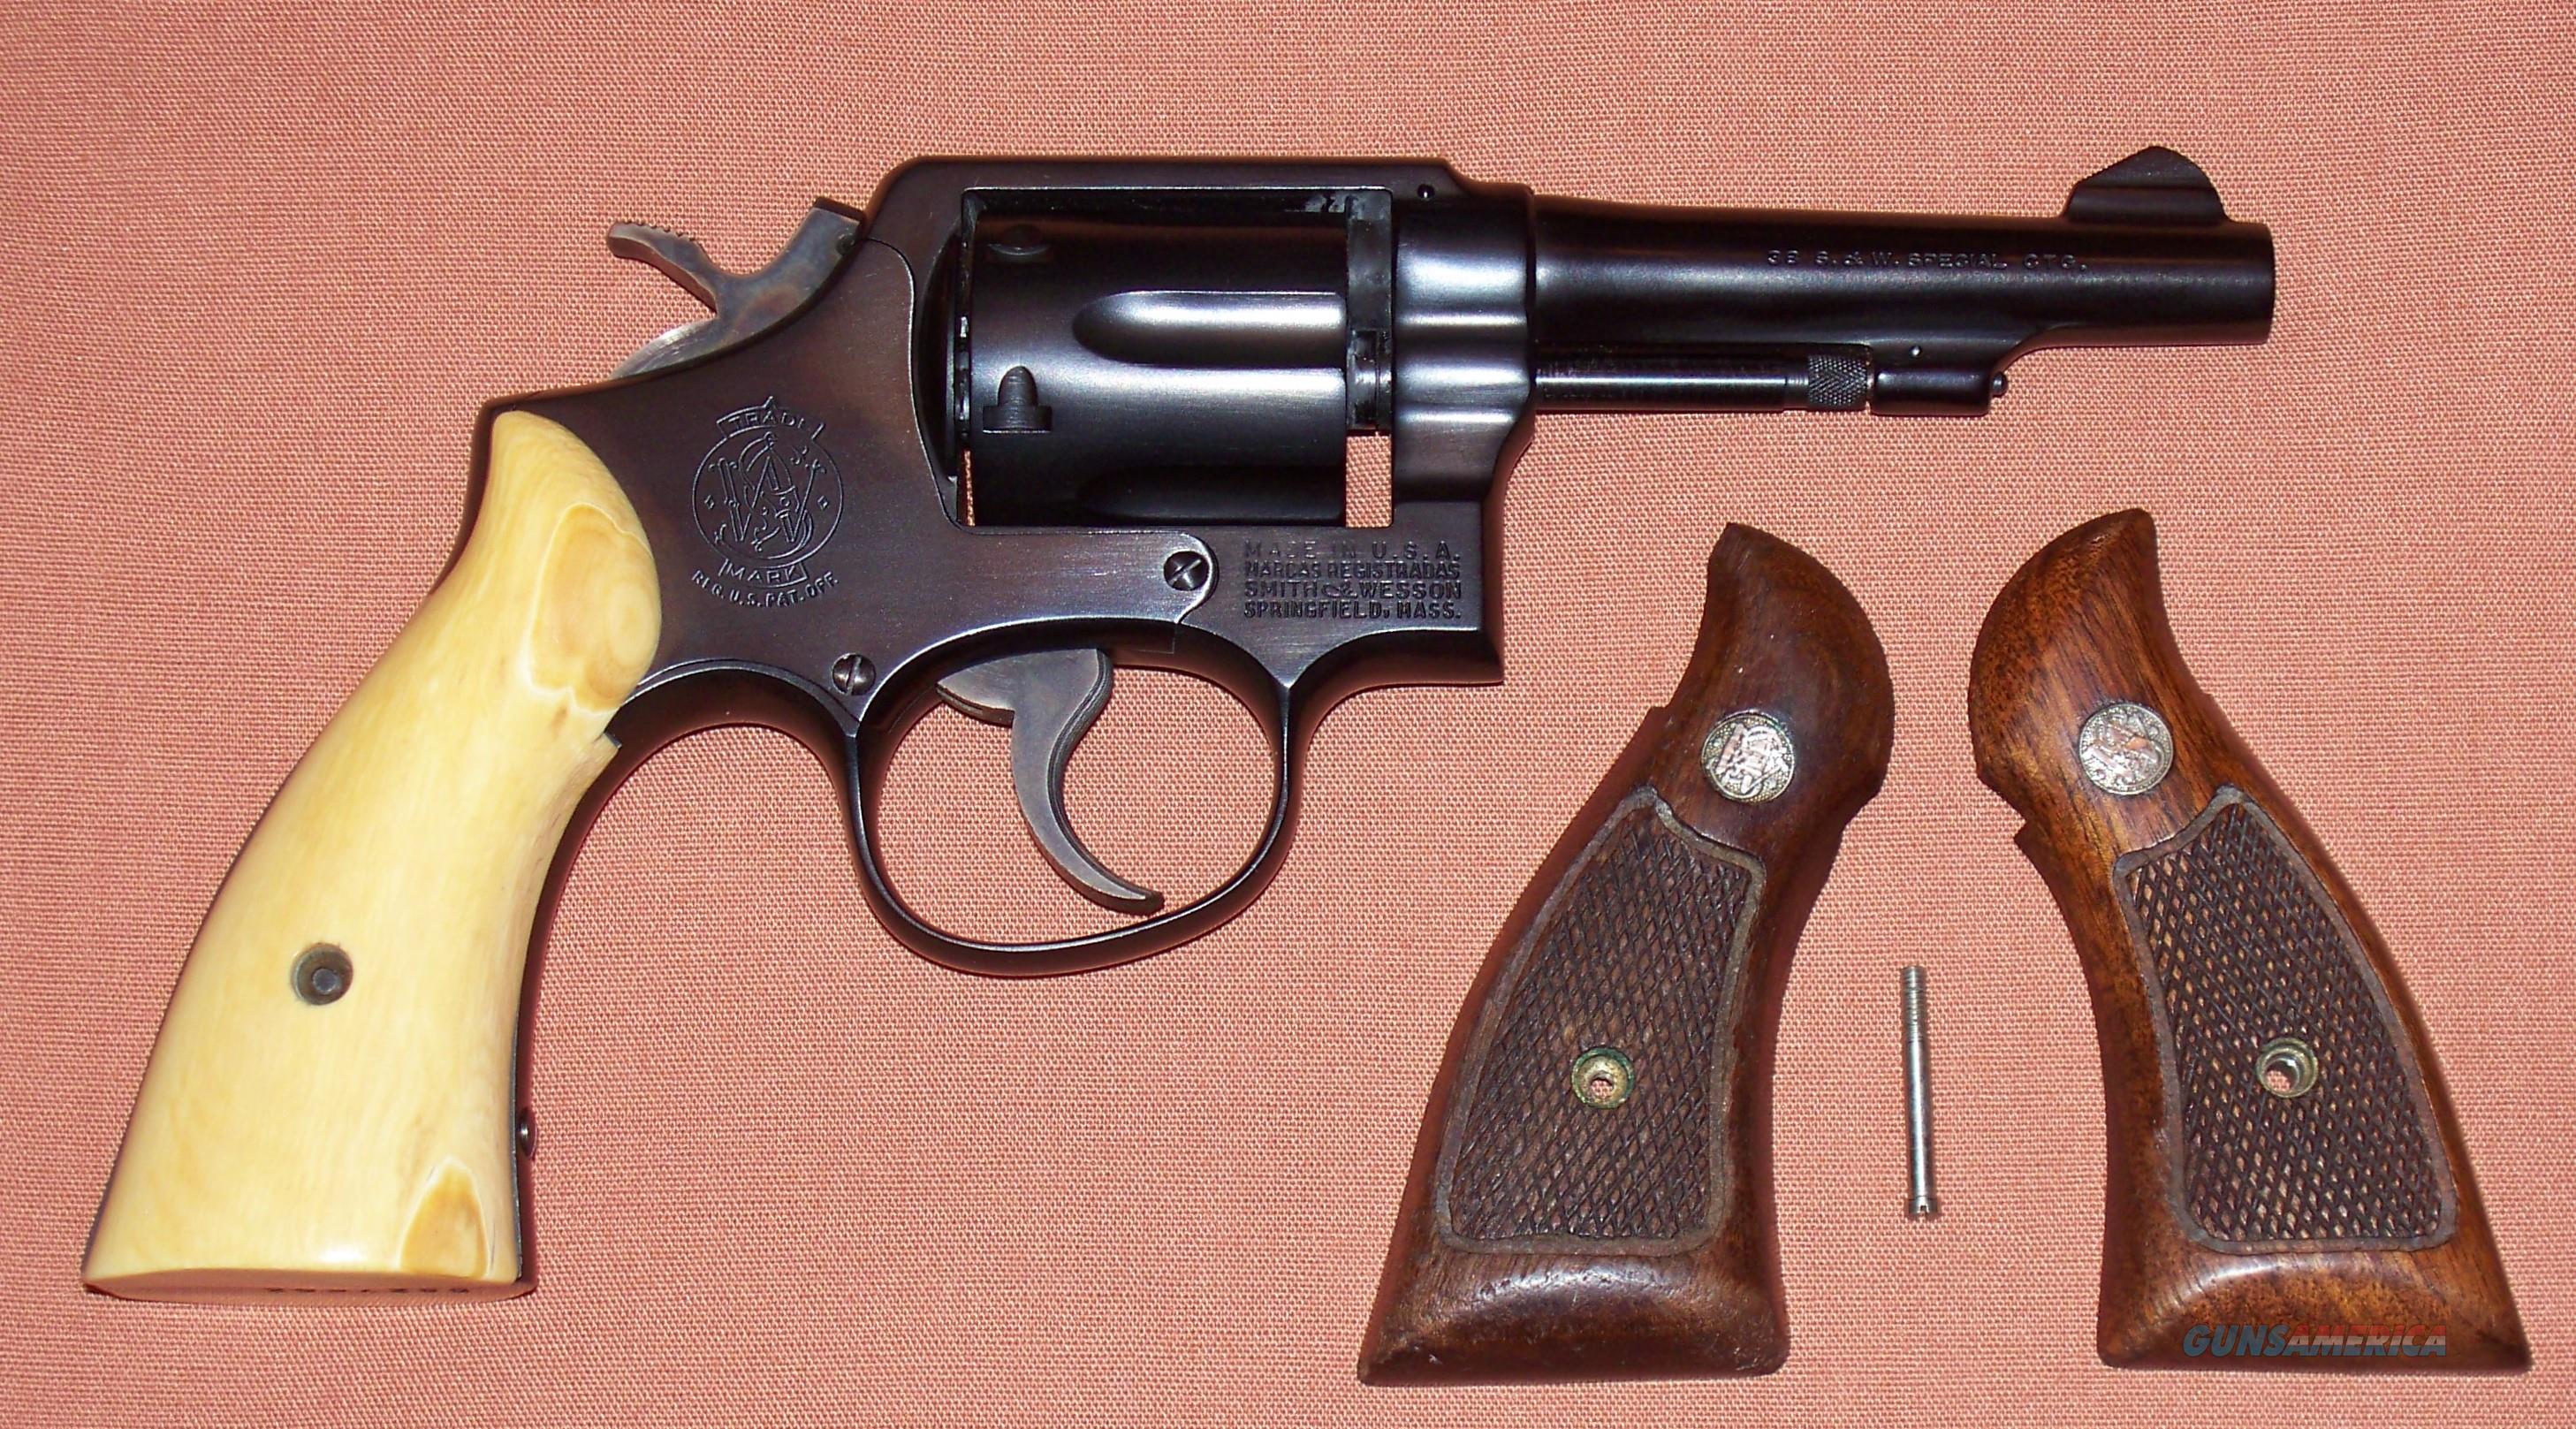 smith and wesson model 10 grips